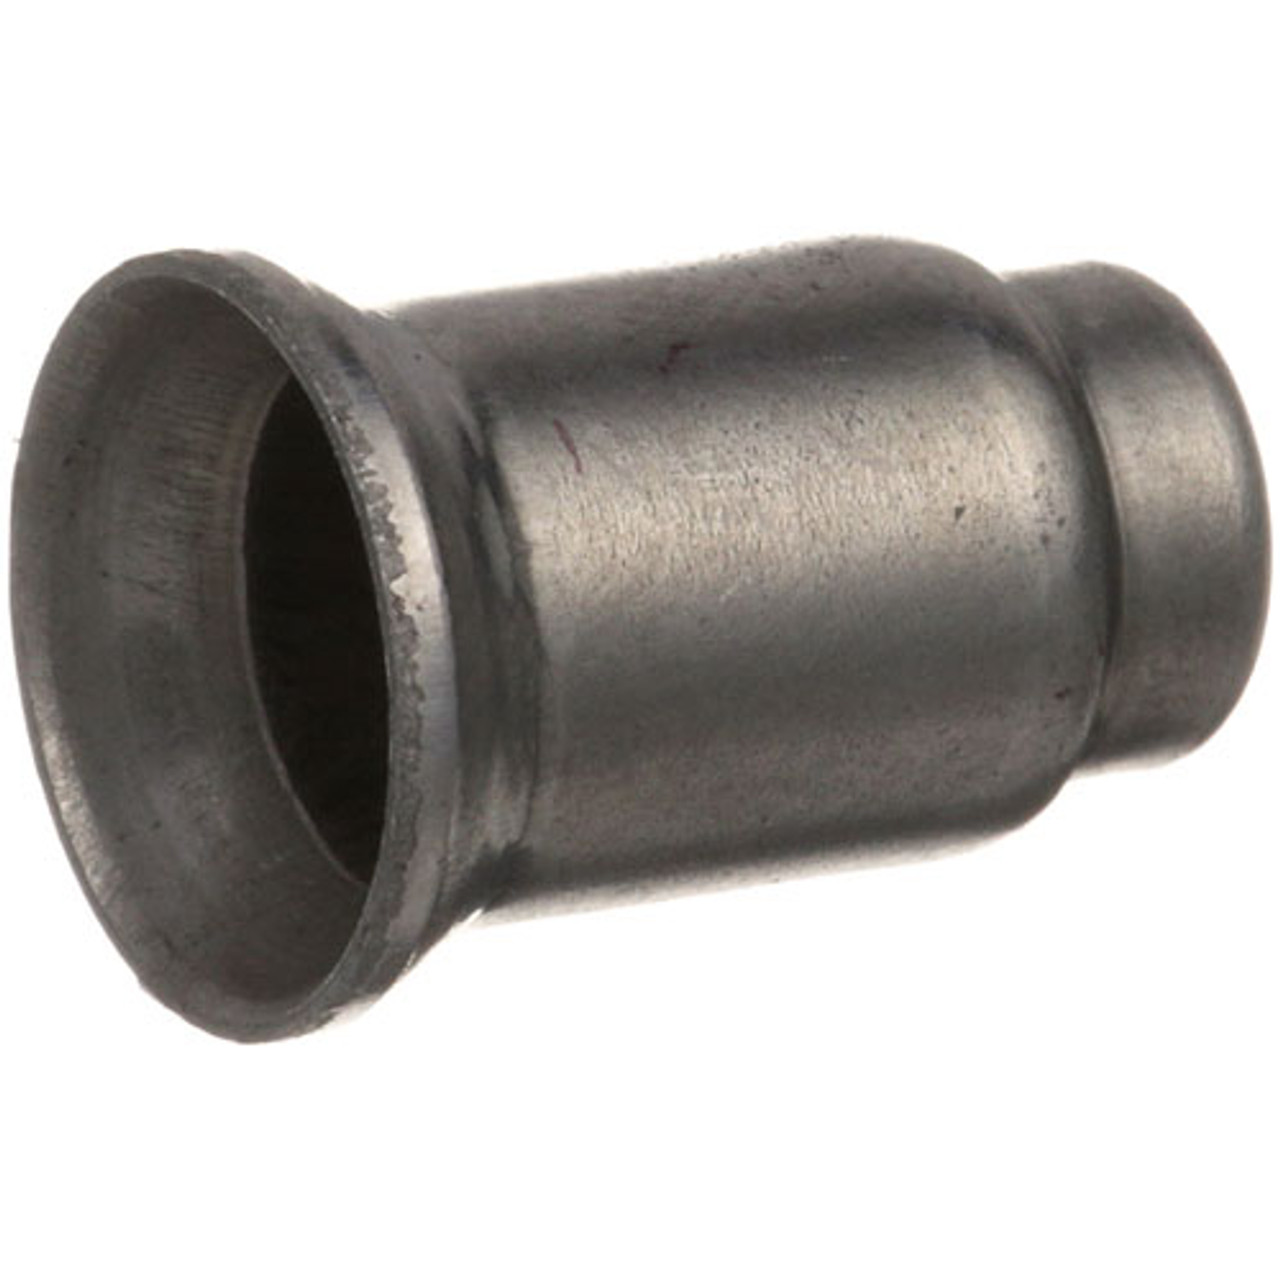 Pilot Orifice .010 - Replacement Part For Star Mfg 45352